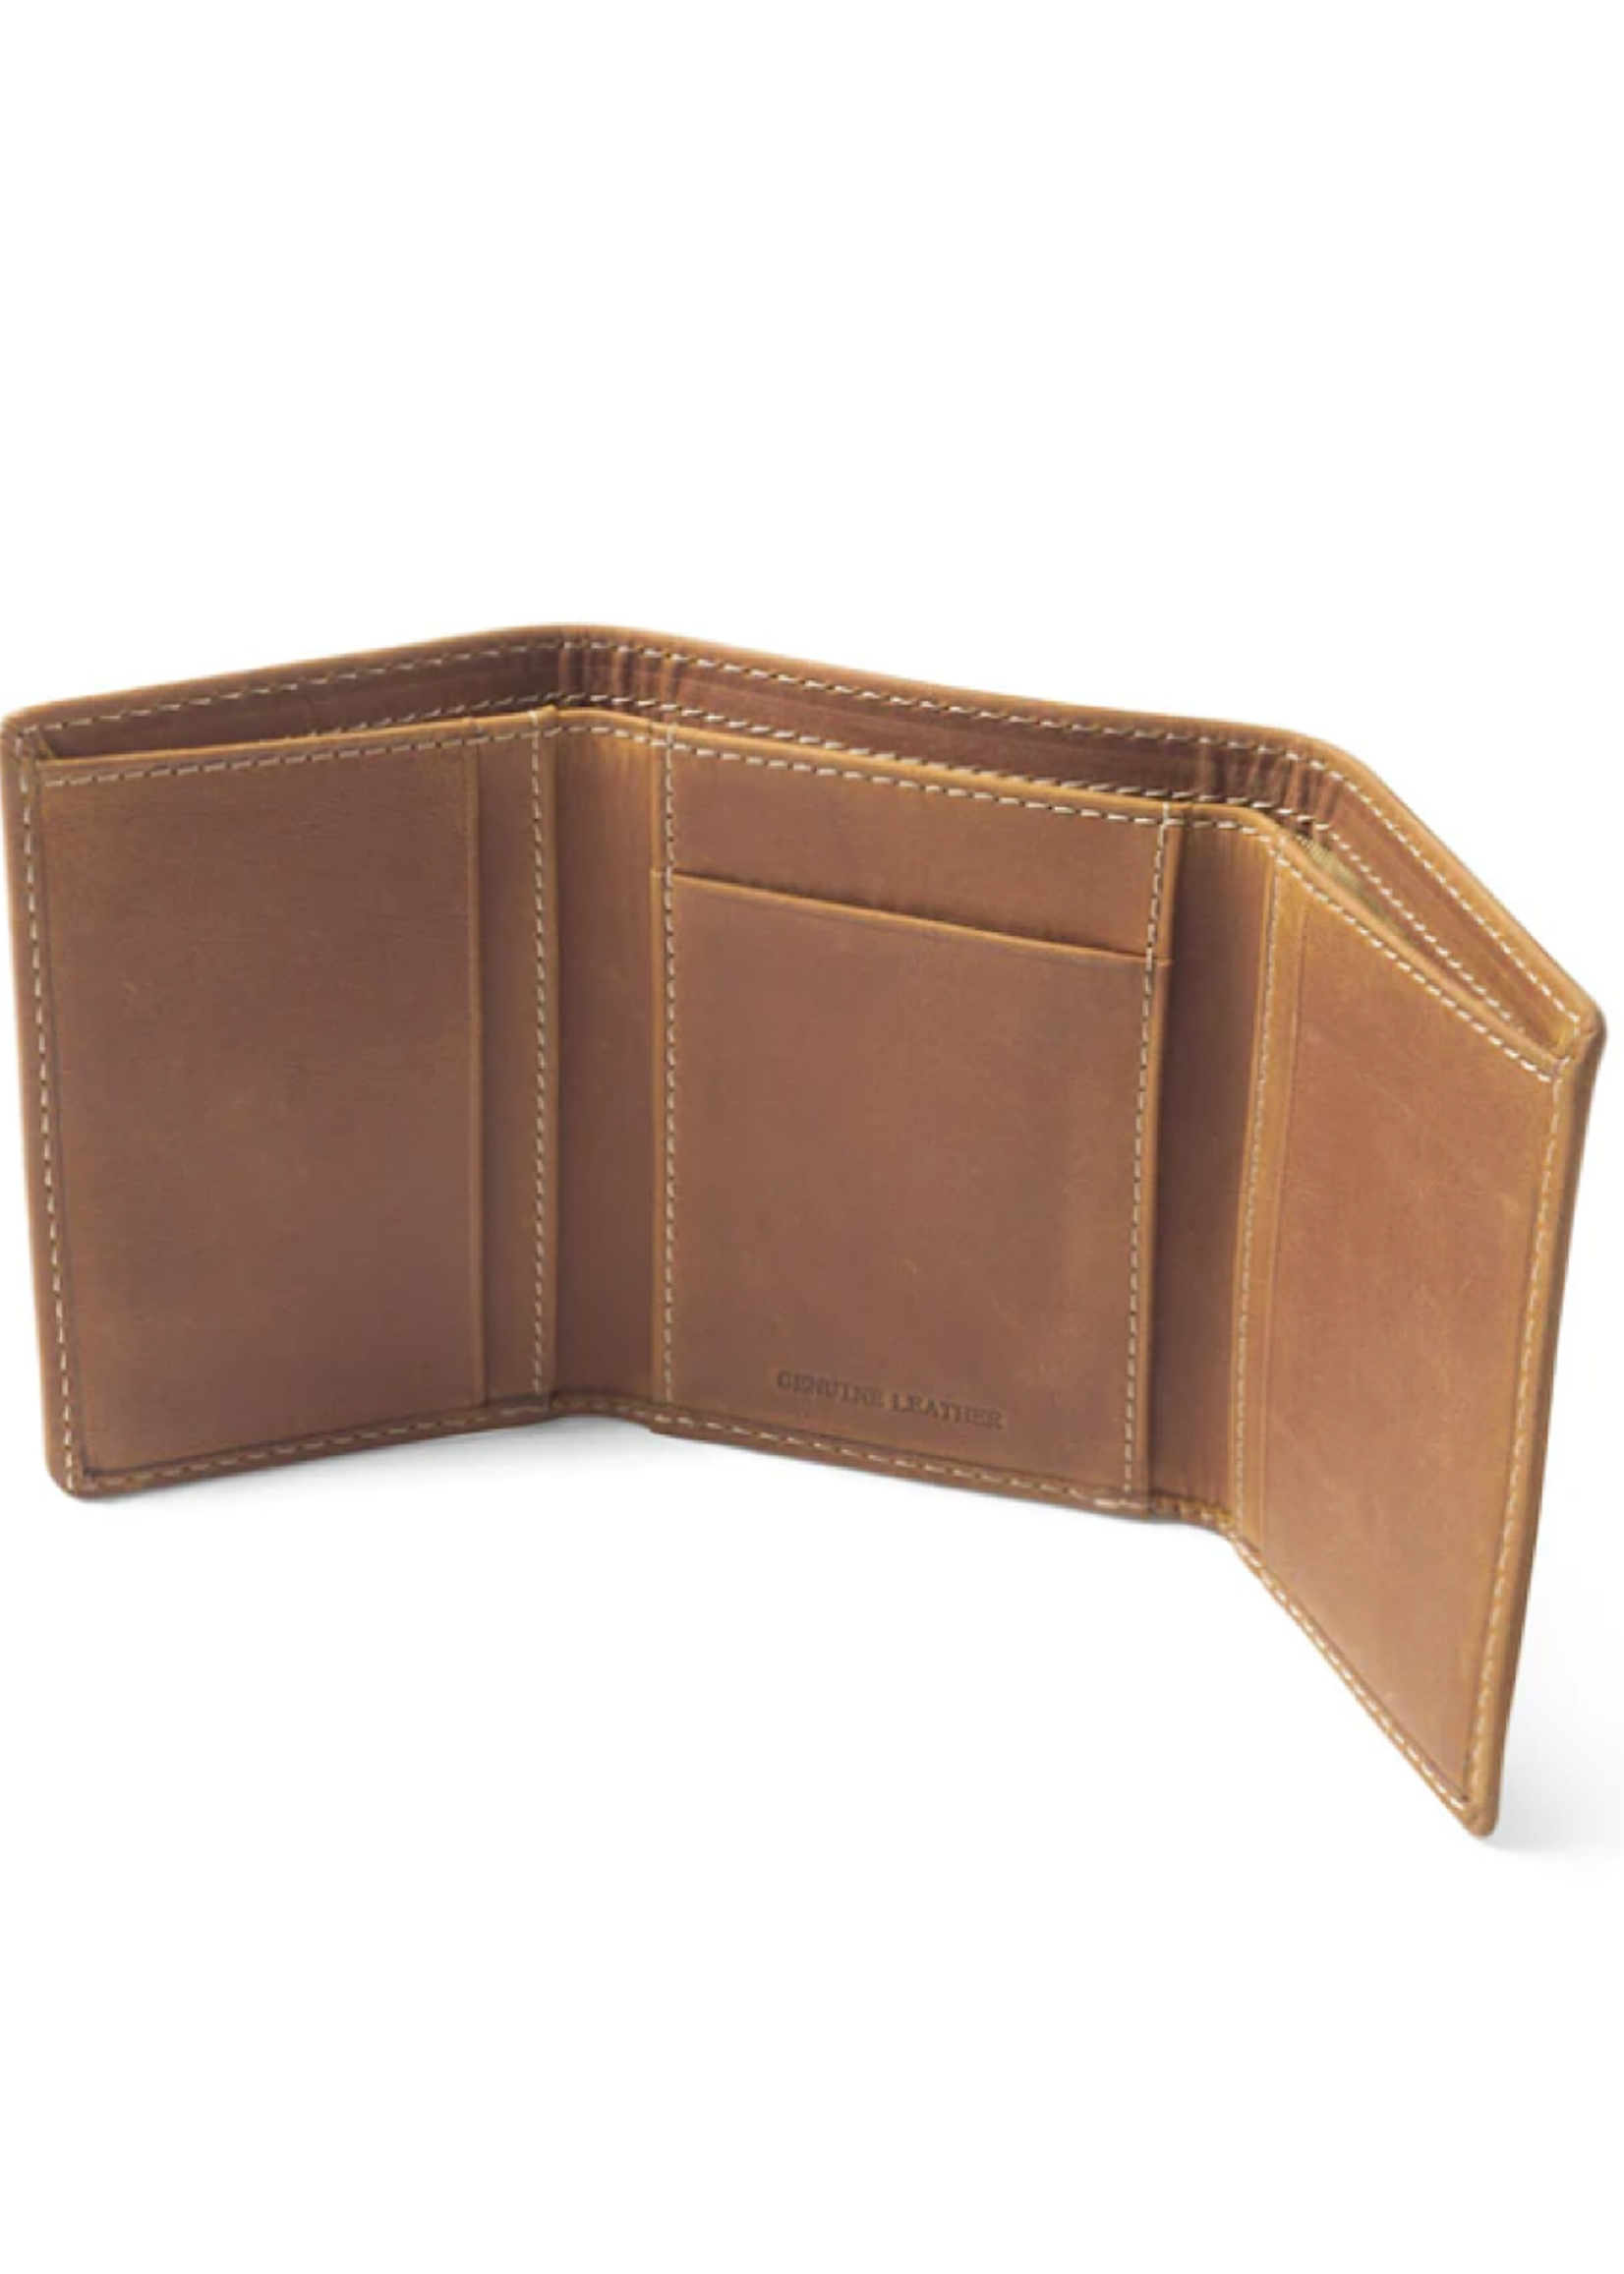 HEYBO Outdoors Heybo Leather Tri-Fold Wallet Brown